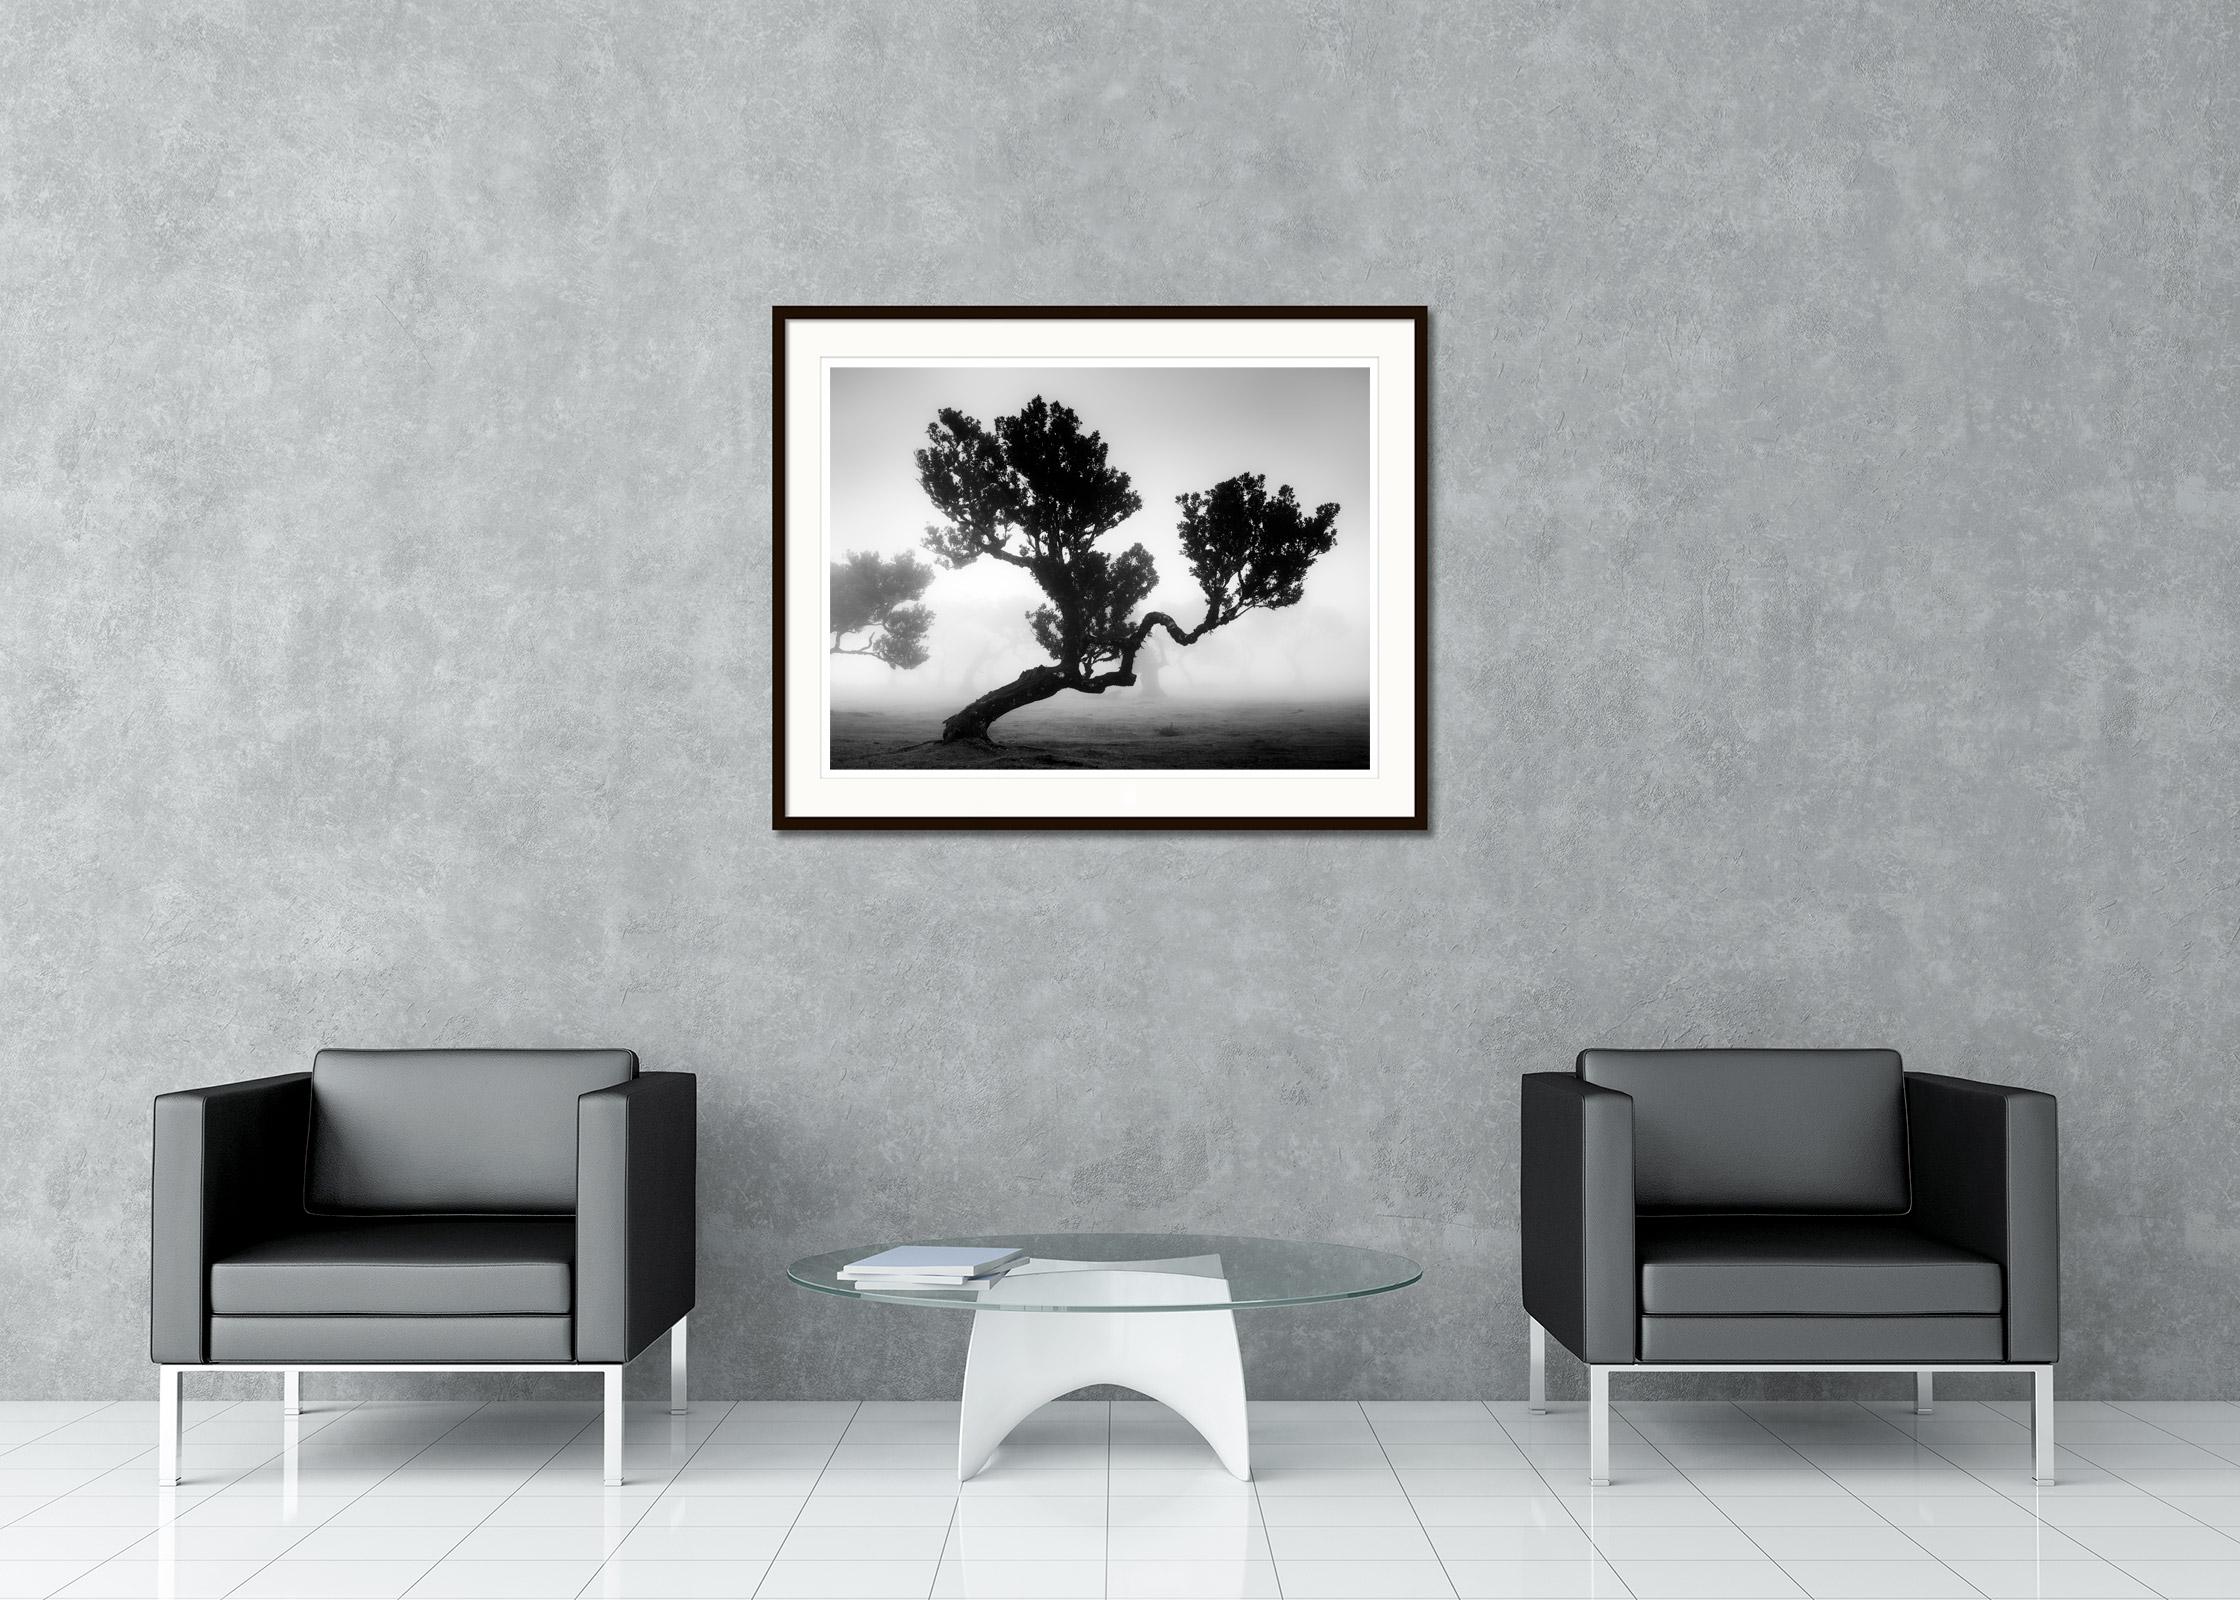 Black and white fine art landscape photography print. Crooked tree in fairy forest in foggy mood, Fanal, Portugal. Archival pigment ink print, edition of 5. Signed, titled, dated and numbered by artist. Certificate of authenticity included. Printed